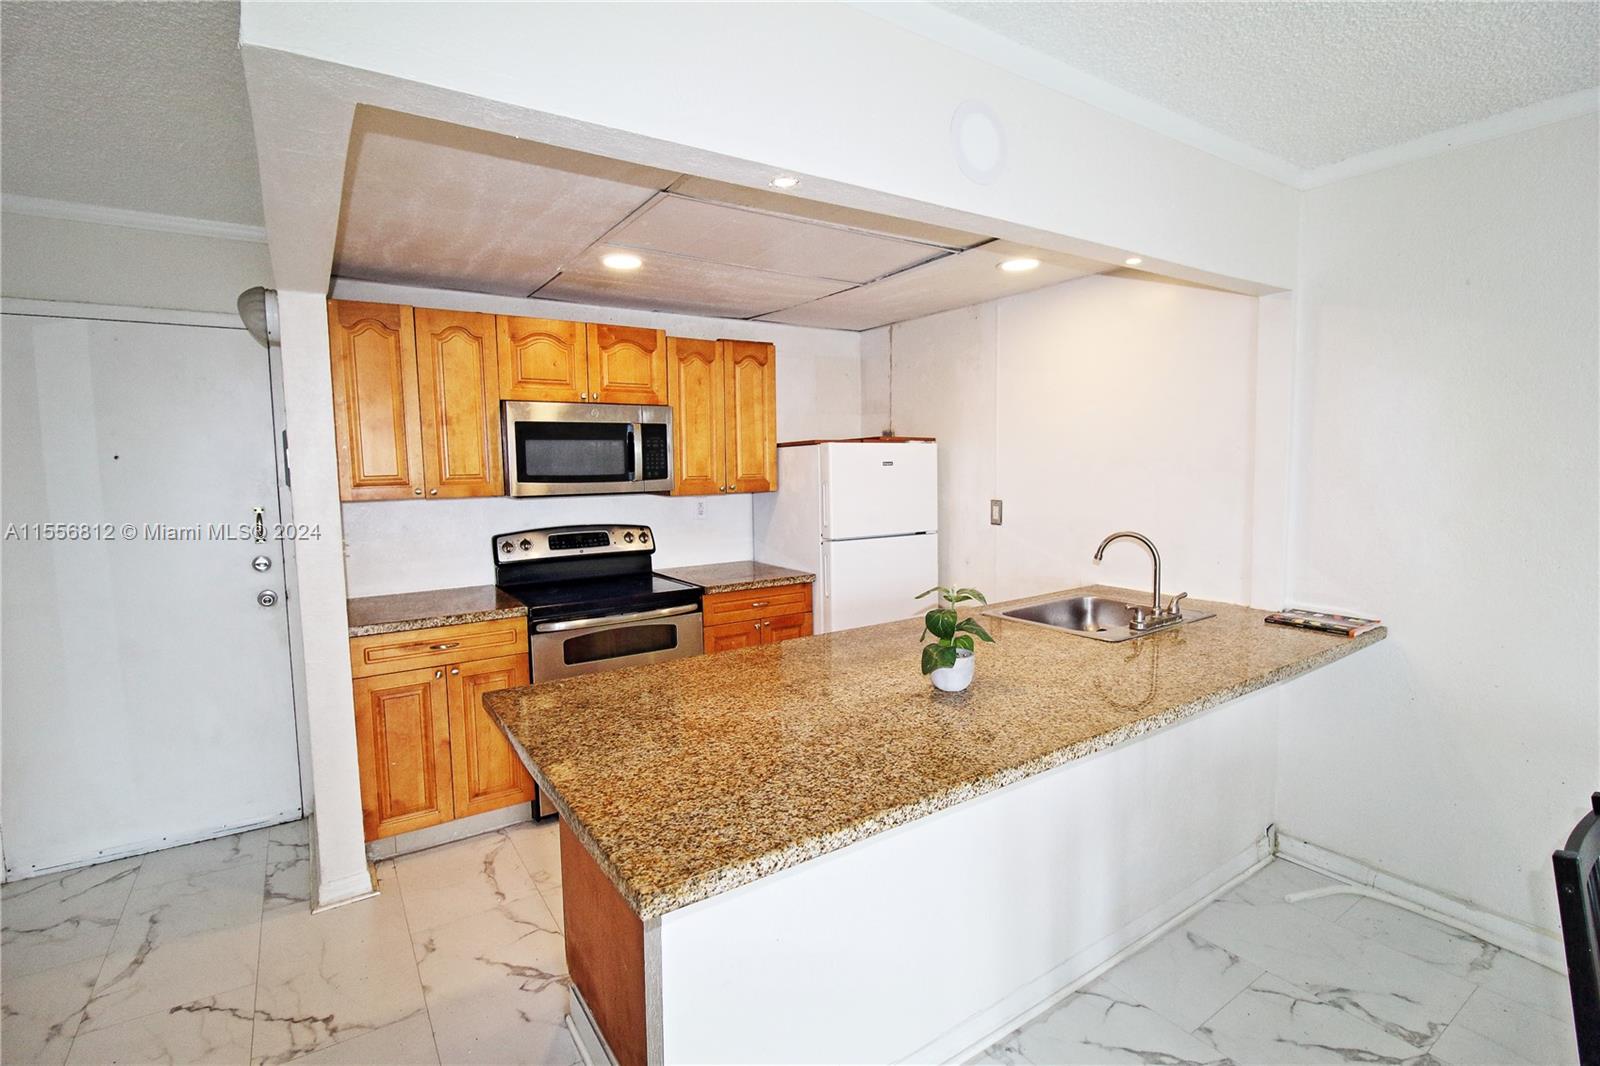 a kitchen with granite countertop counter top space cabinets and stainless steel appliances